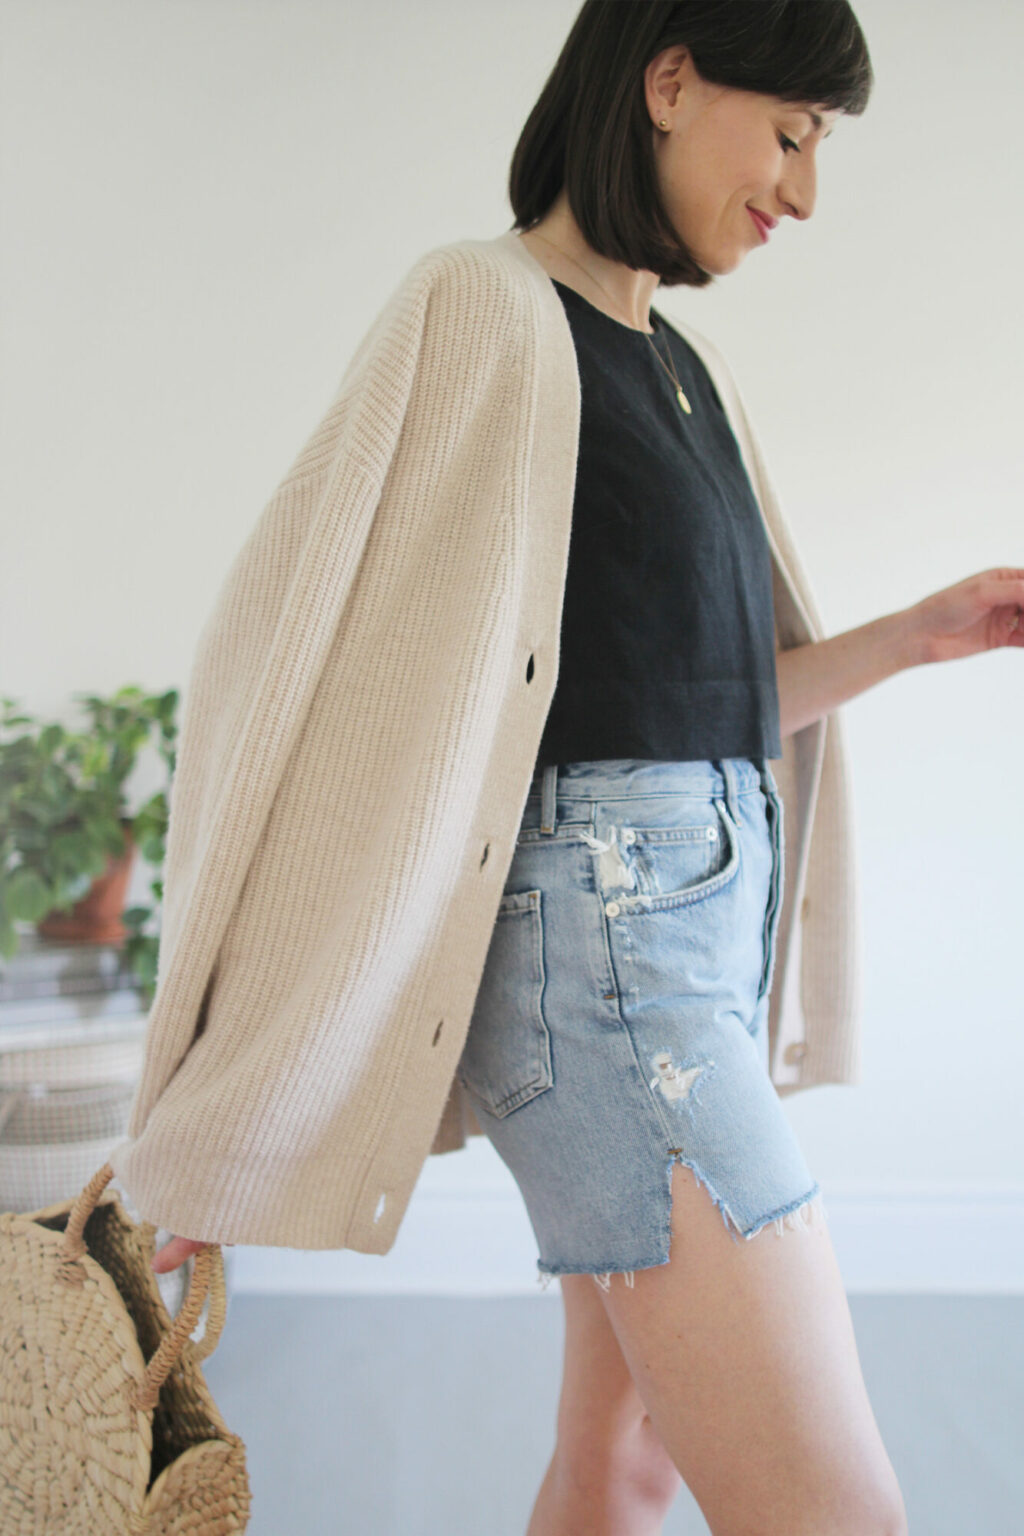 A WEEK OF OUTFITS IN THE COCOON CARDIGAN